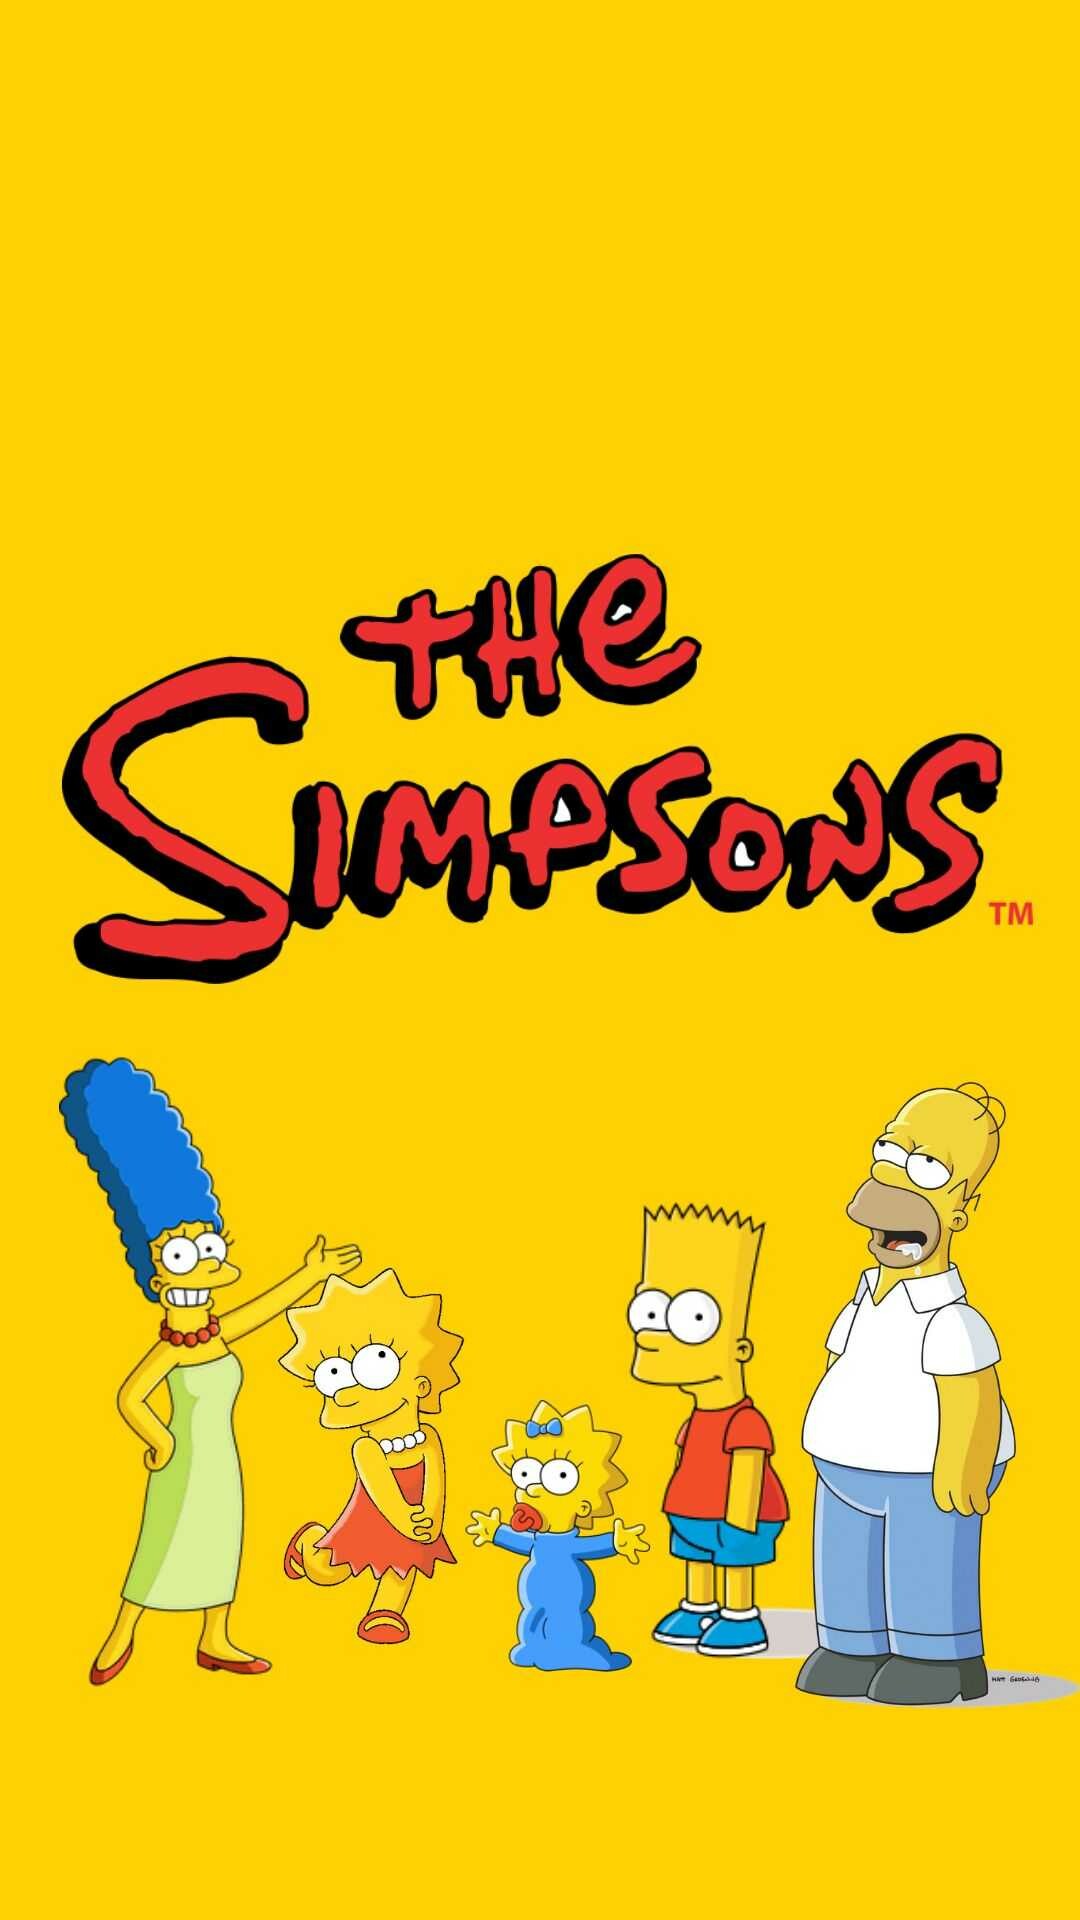 The Simpsons: The cartoon made its debut as 60-second animated bumpers for The Tracey Ullman Show. 1080x1920 Full HD Wallpaper.